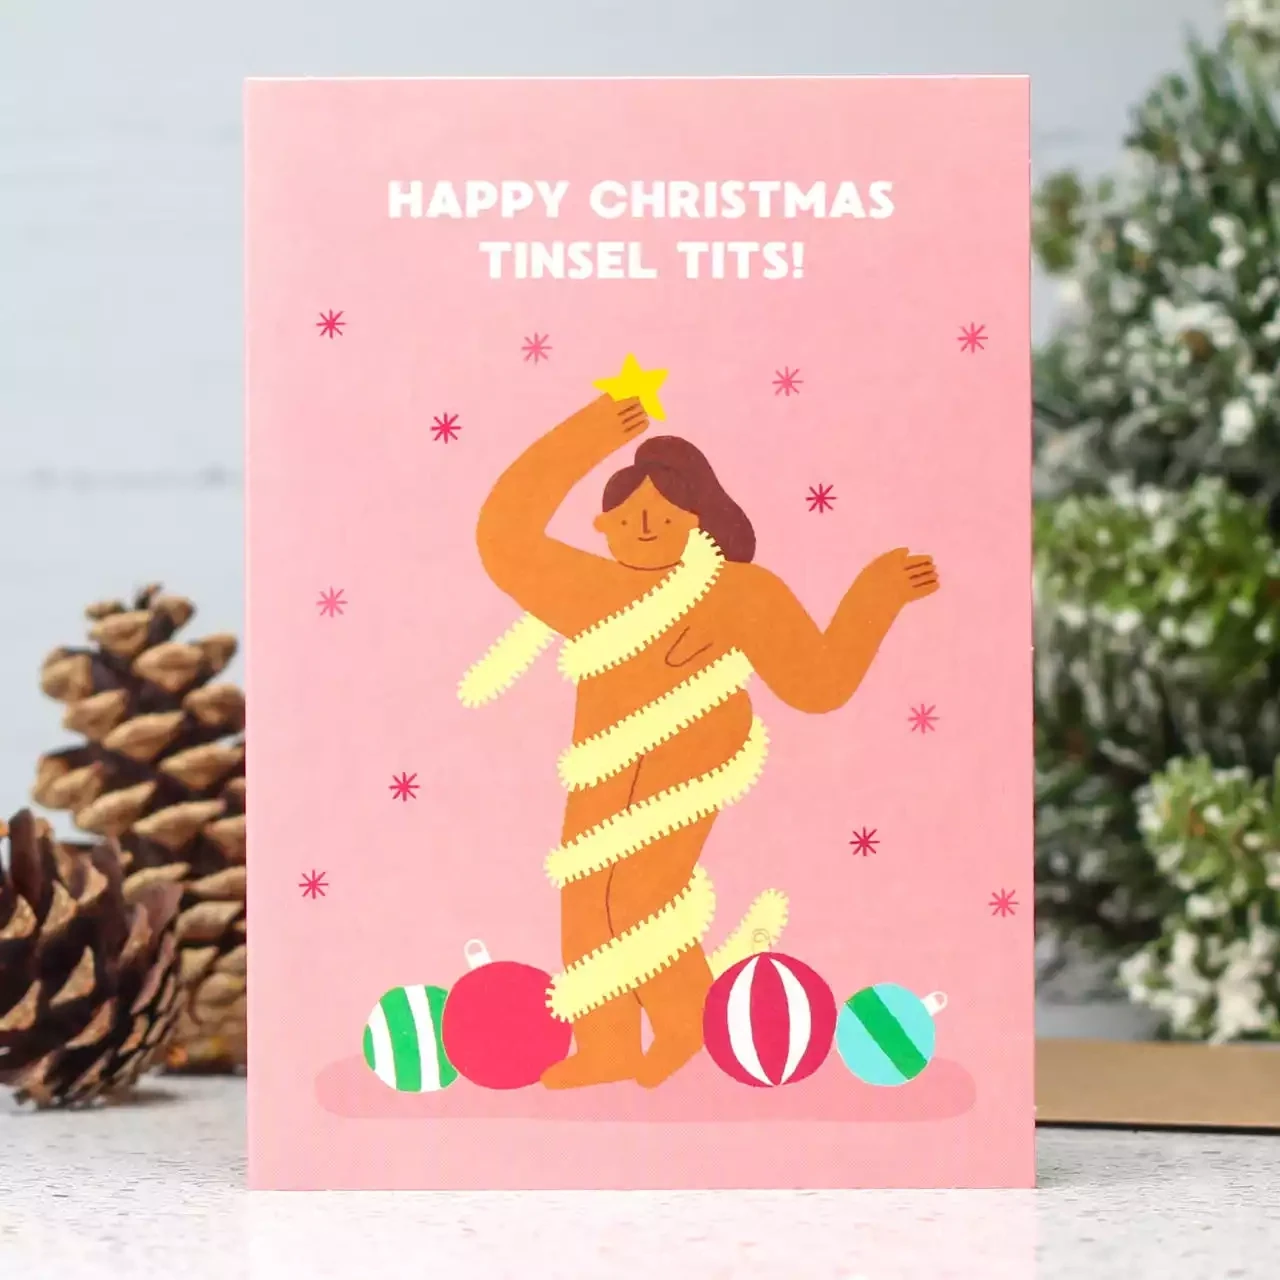 Tinsel Tits Christmas Card by Stormy Knight